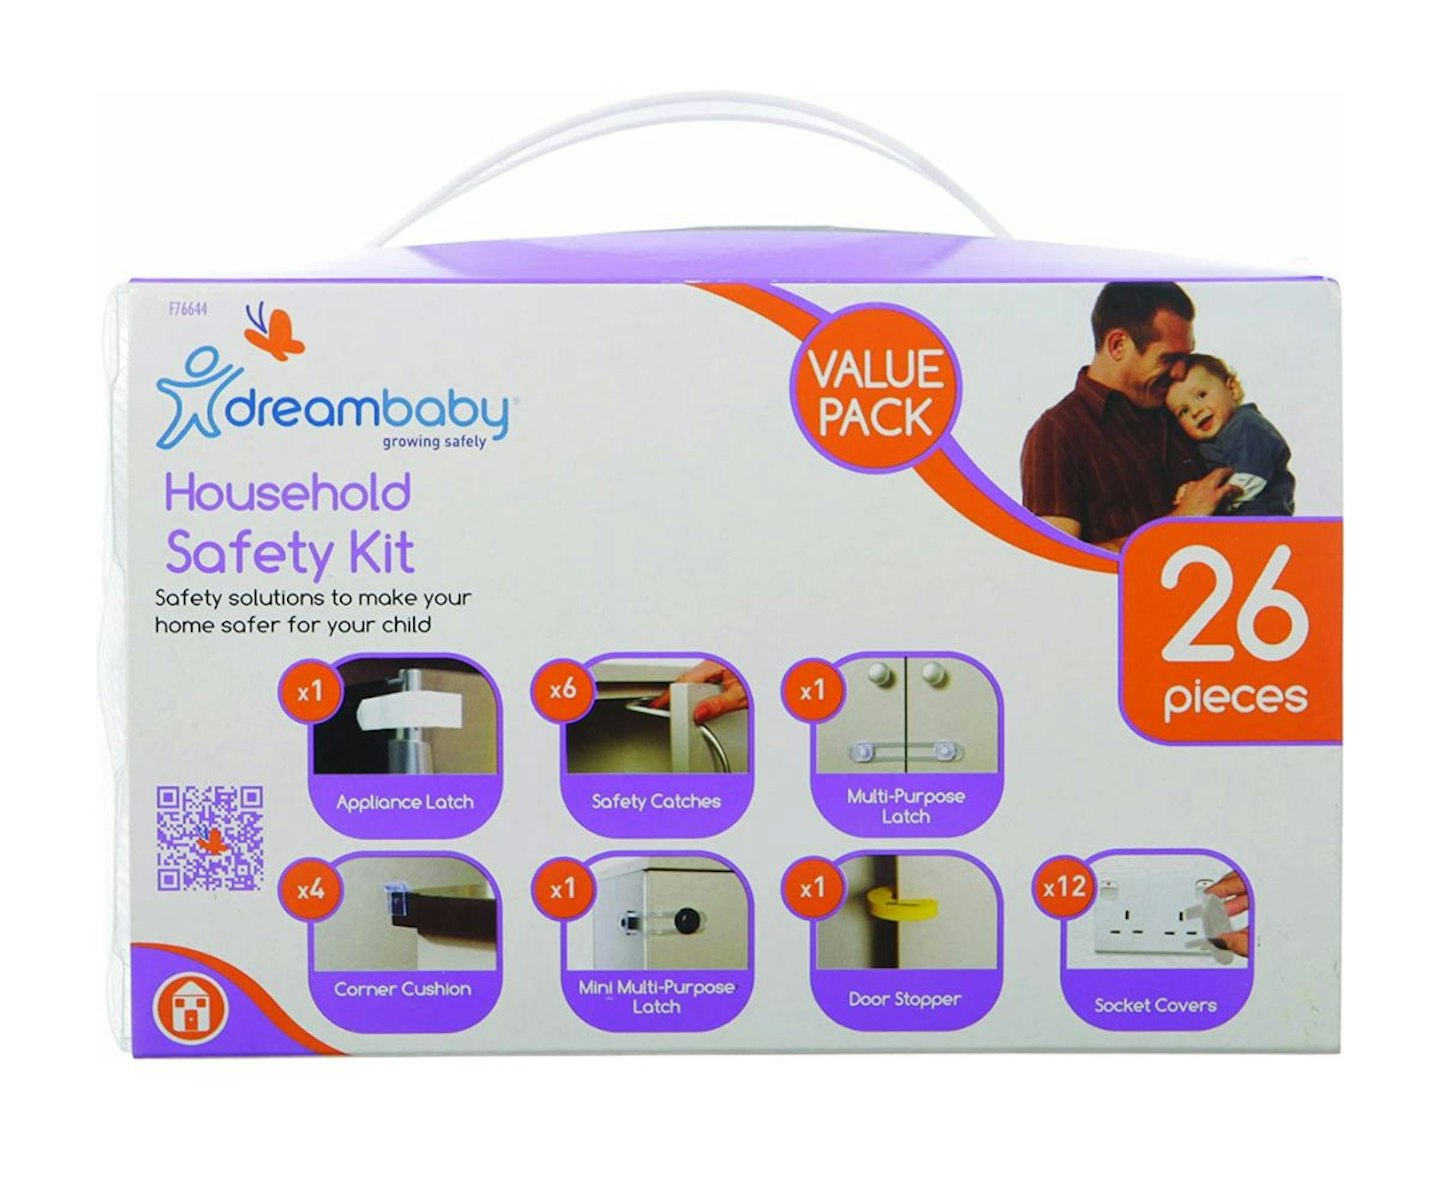 The Top Baby Safety Products for Baby-Proofing Your Home